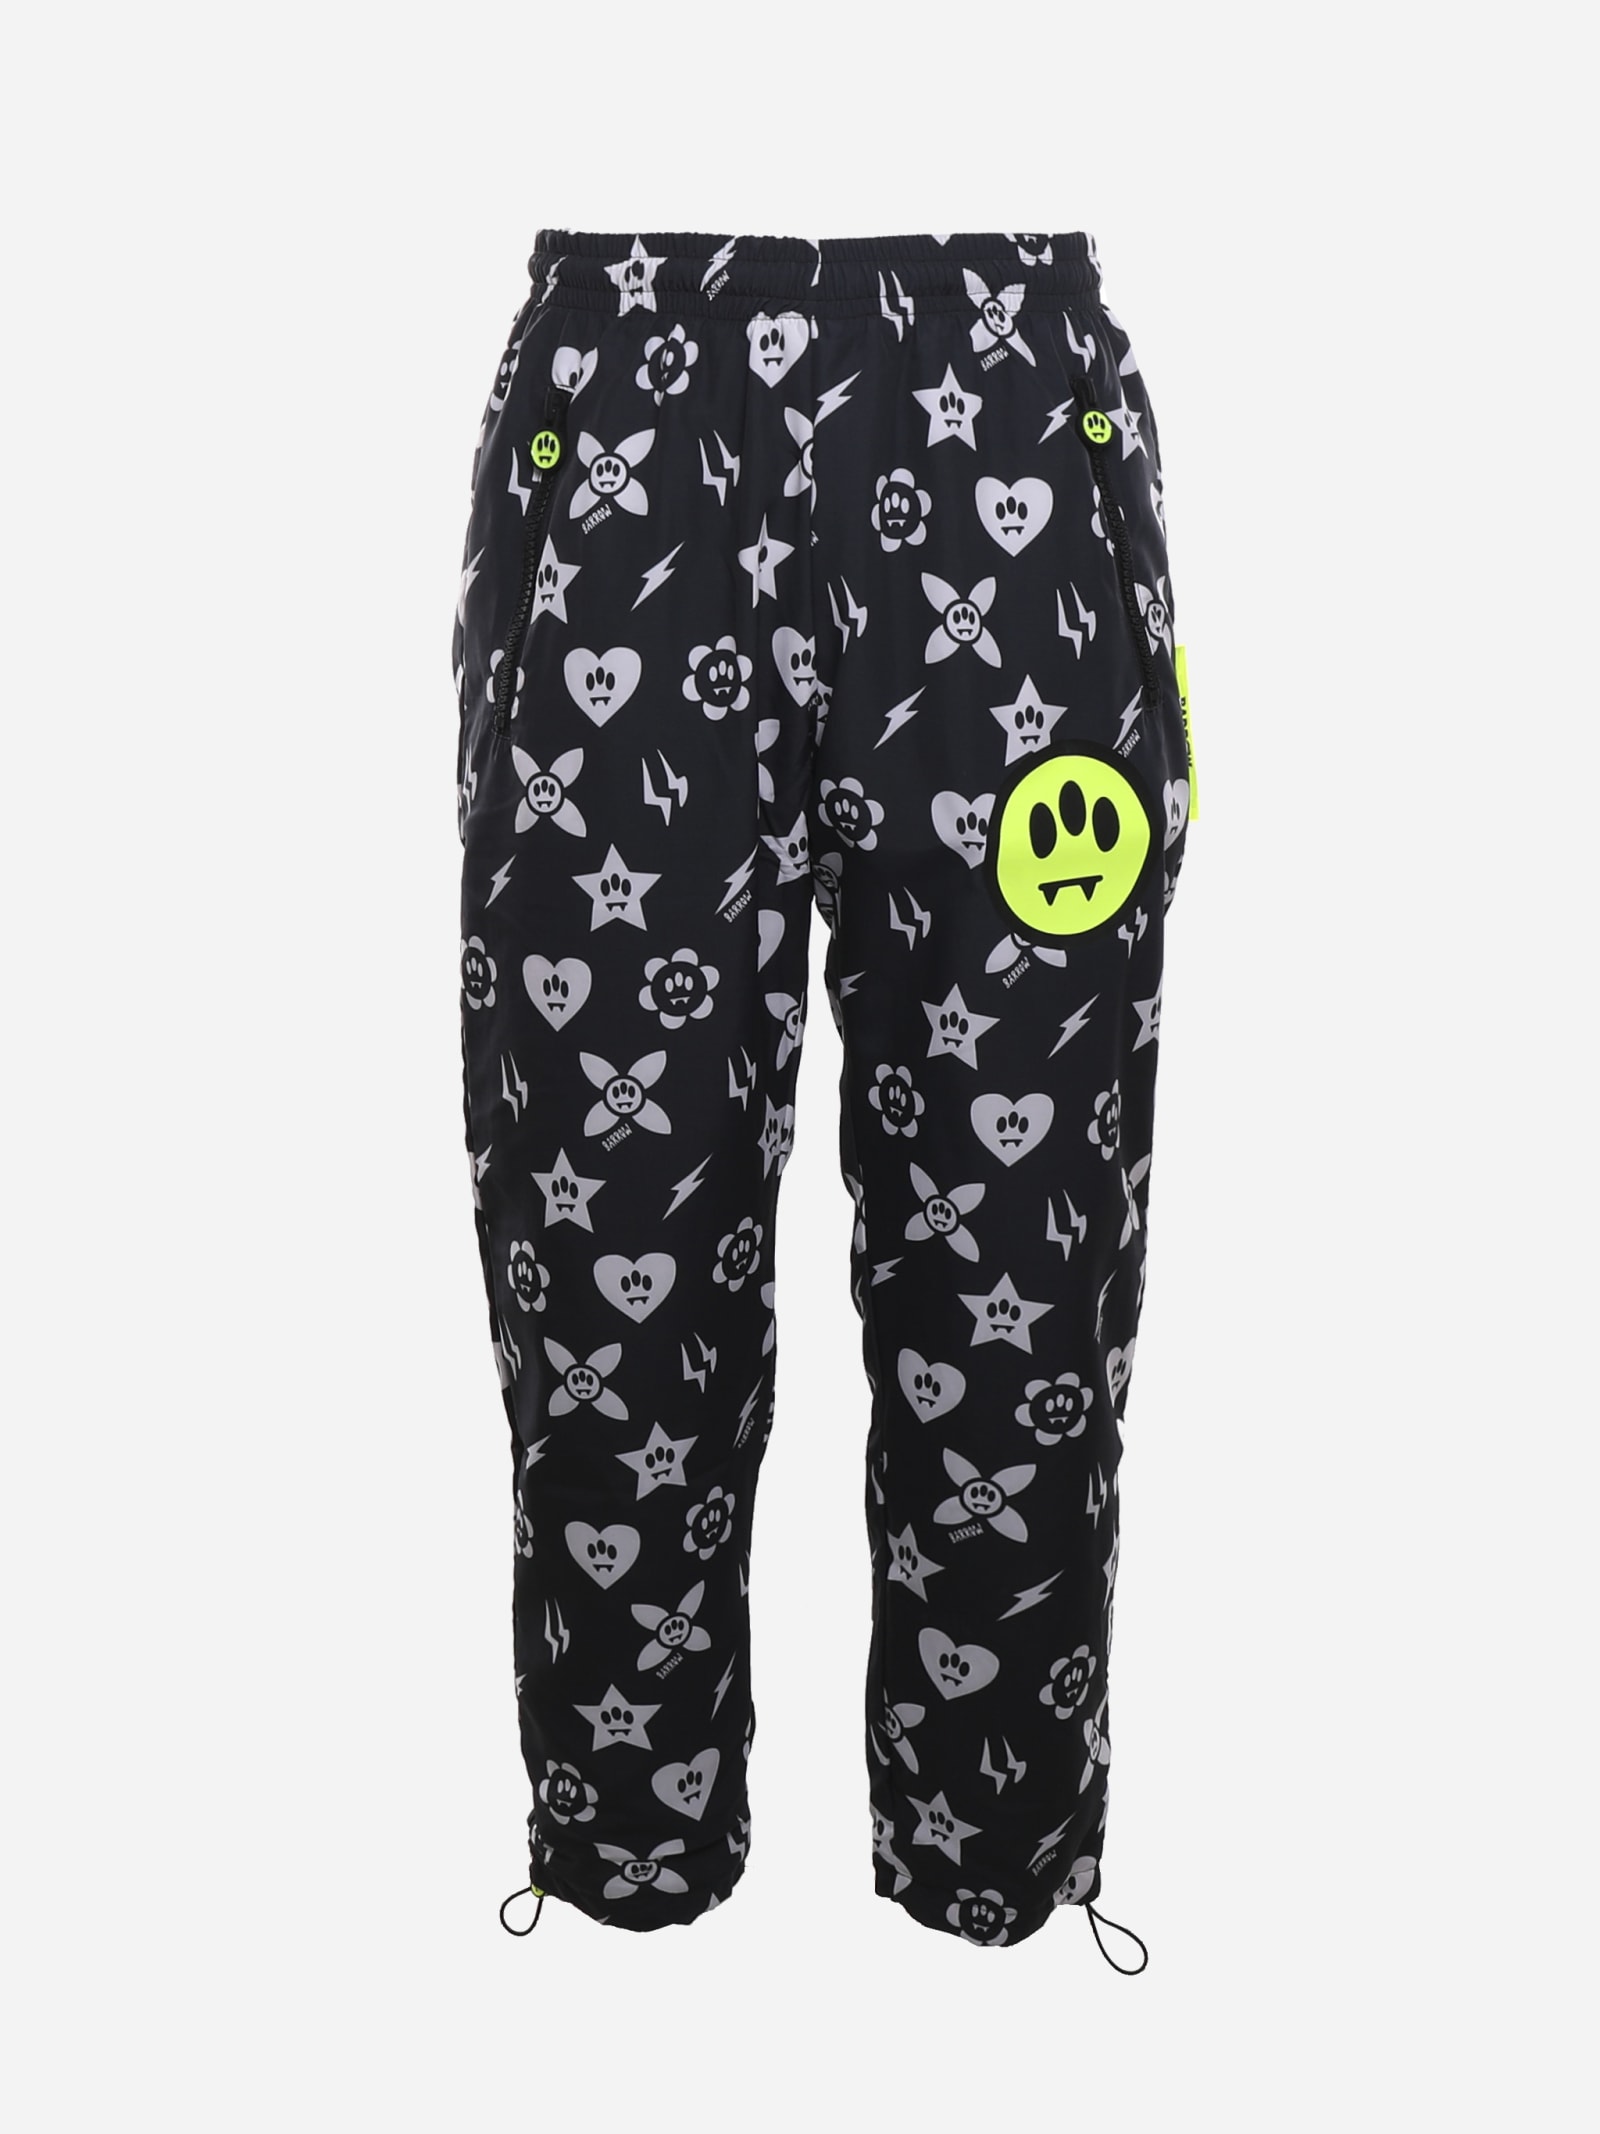 BARROW NYLON TROUSERS WITH ALL-OVER GRAPHIC PRINT,029158 -110